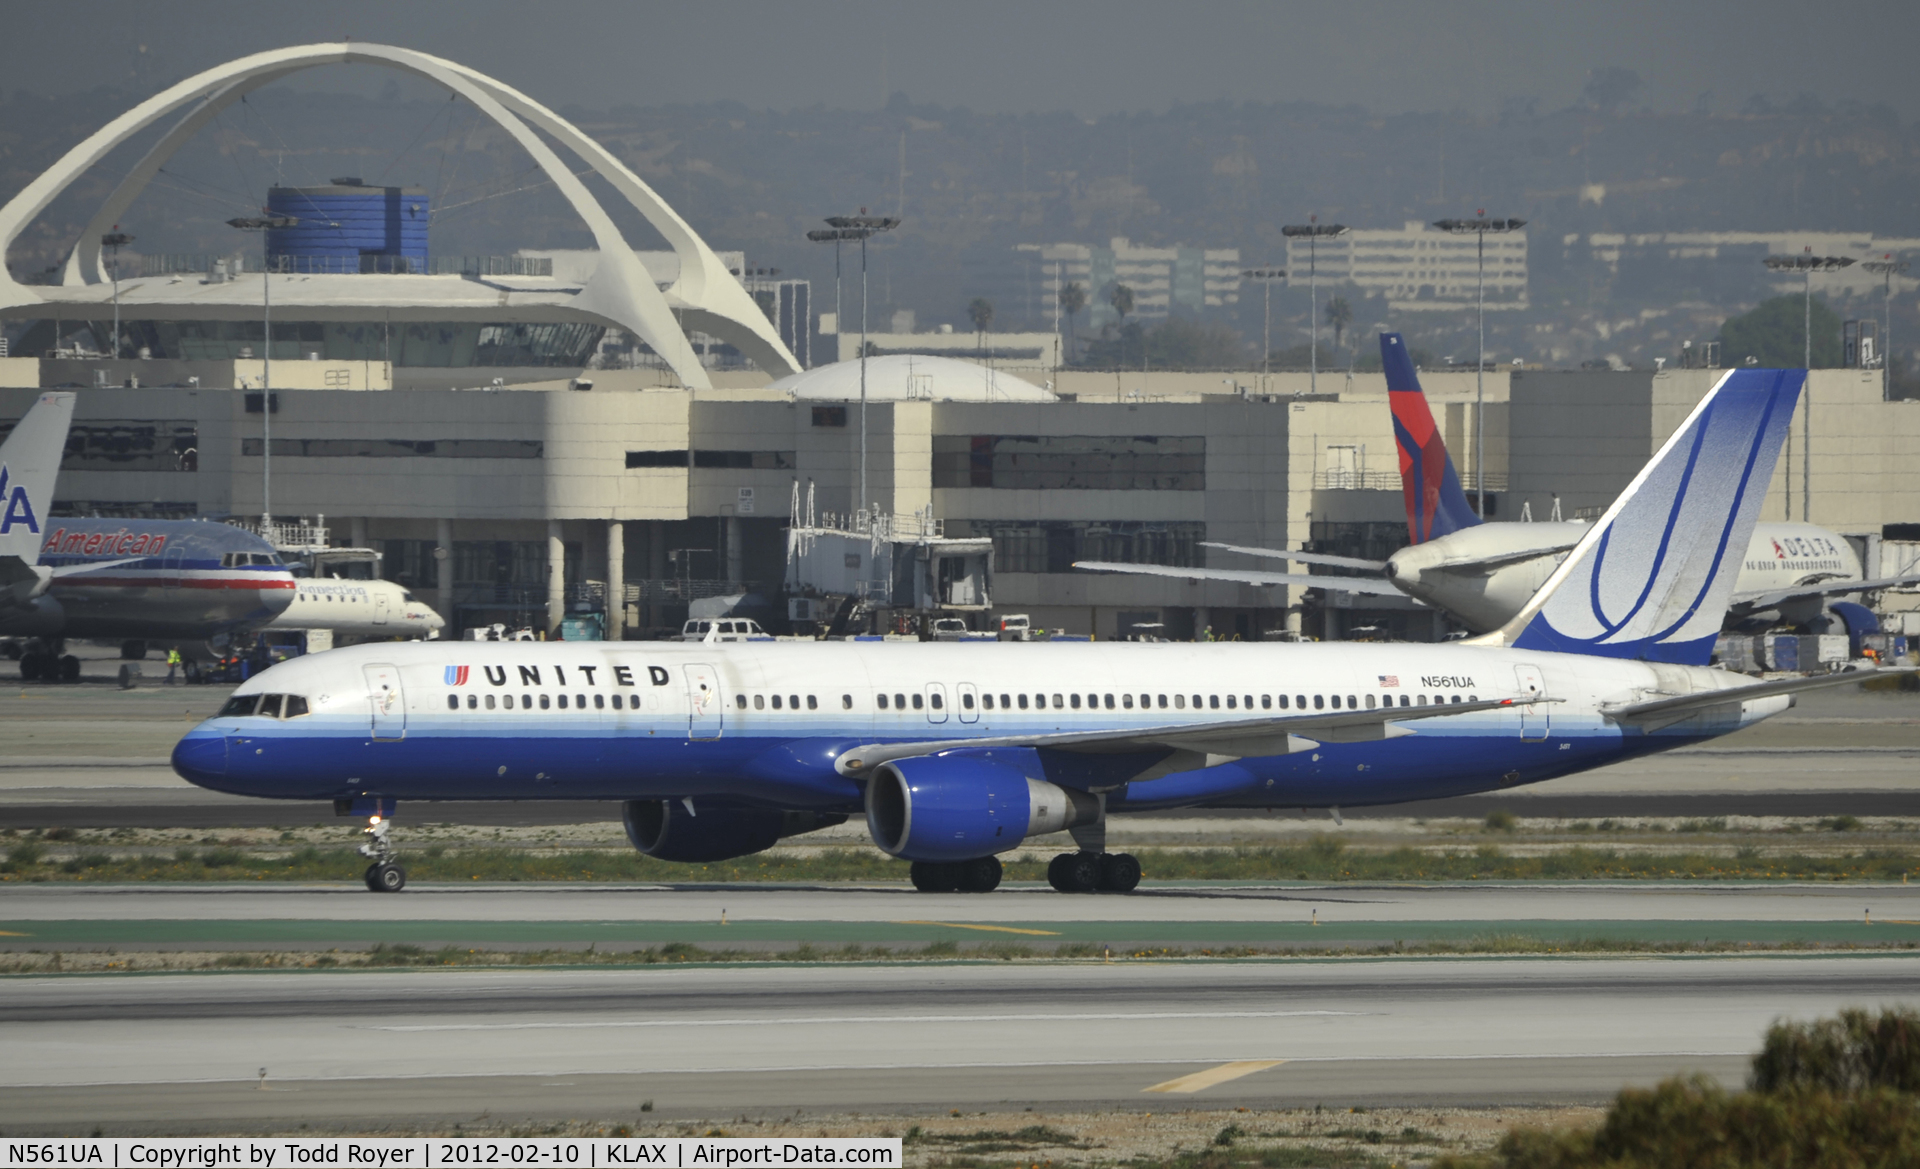 N561UA, 1992 Boeing 757-222 C/N 26661, Just arrived at LAX on 25L